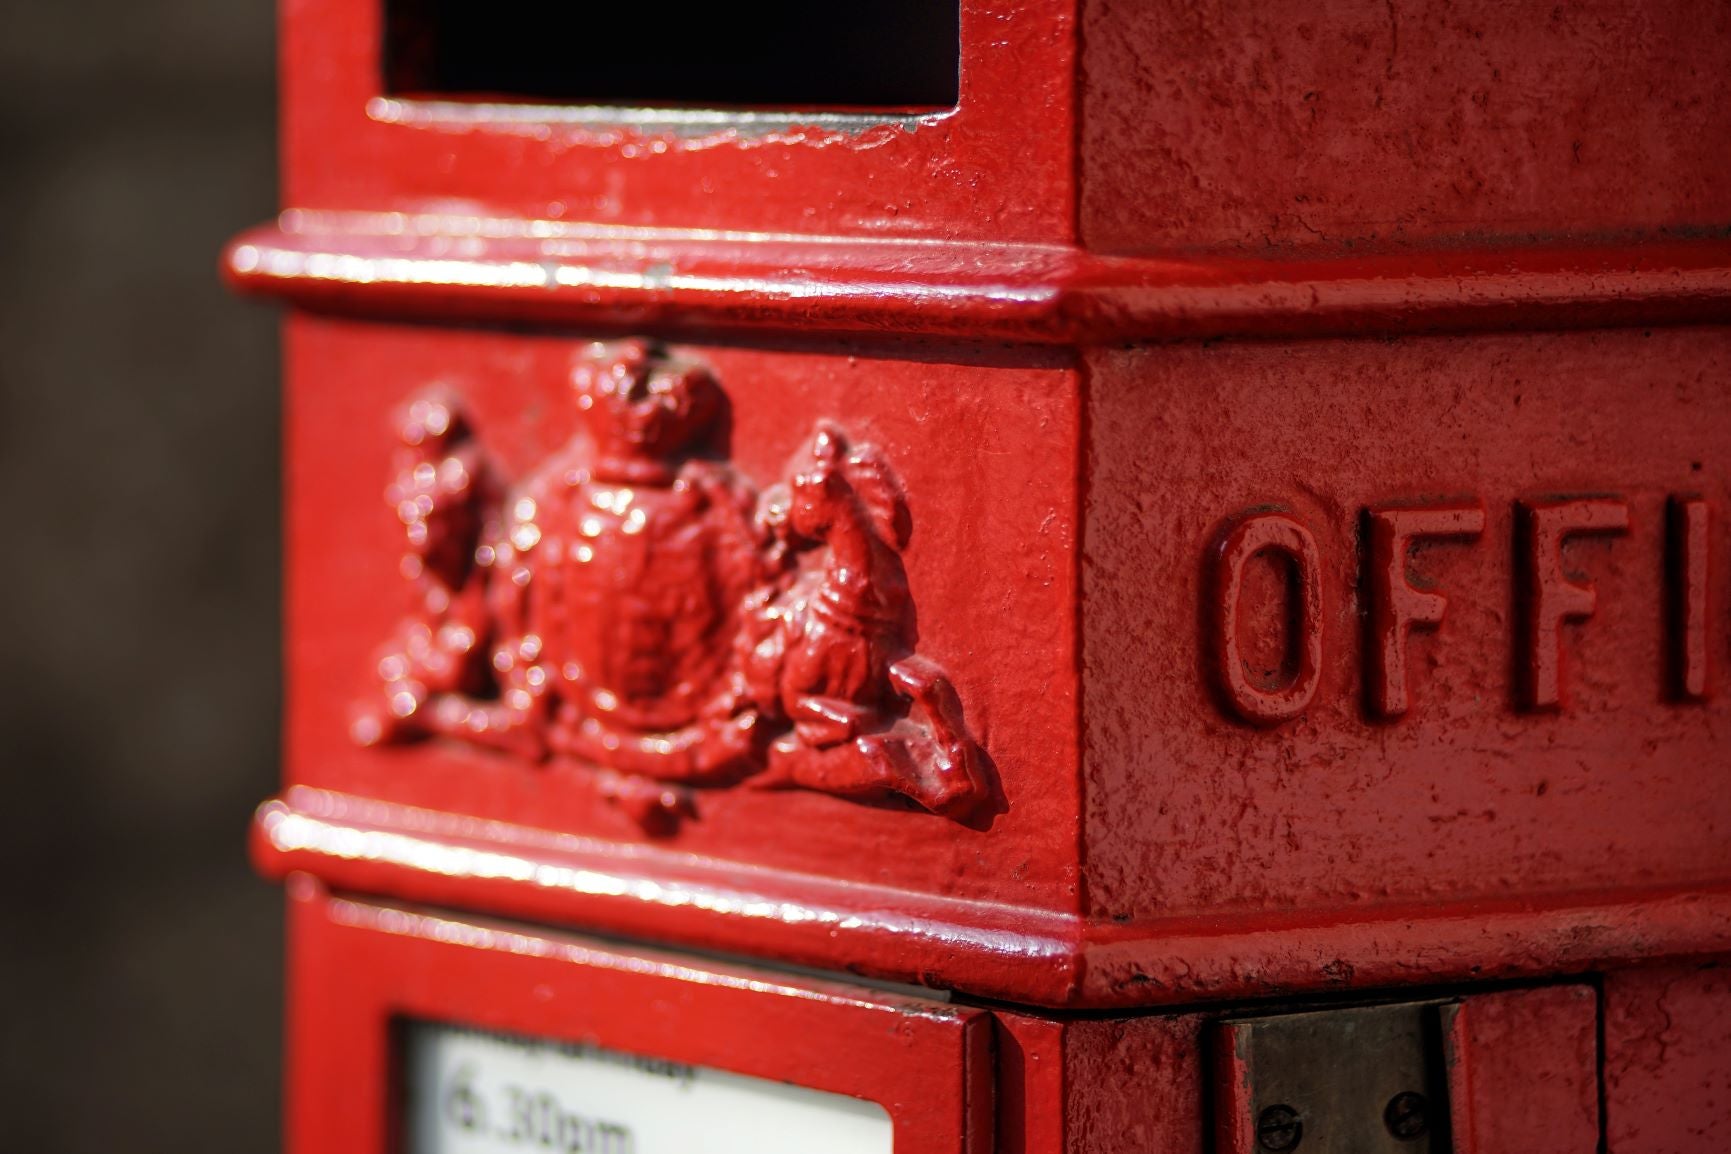 Gov't Pays £15 Million for Access to Royal Mail Data